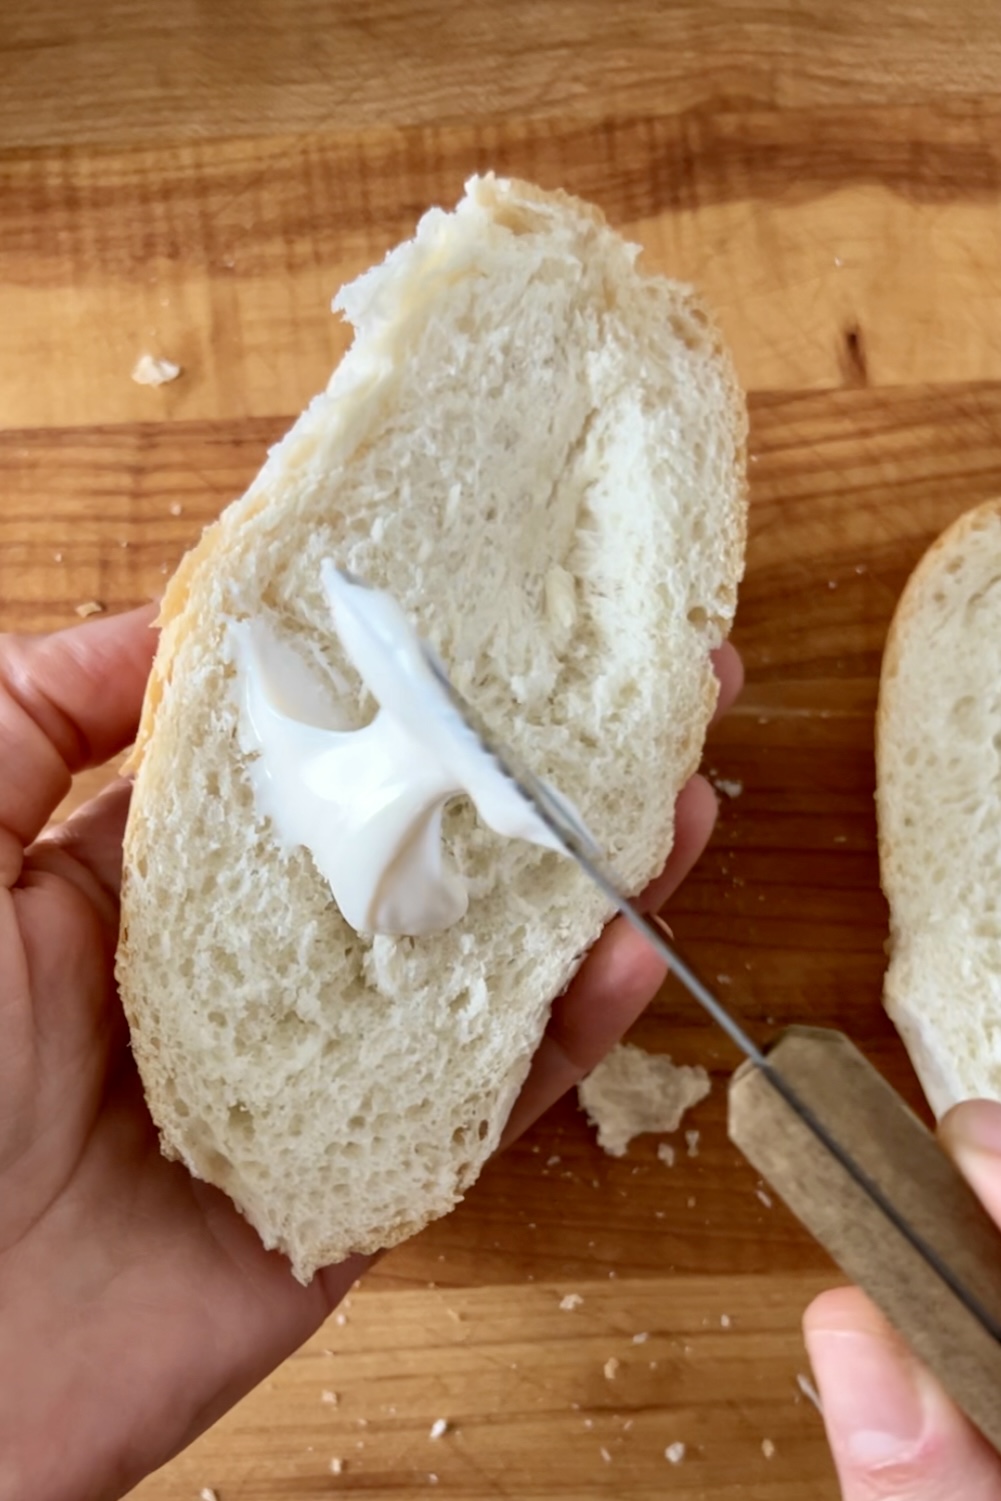 A person cutting a piece of bread with a knife to prepare spicy sandwiches.